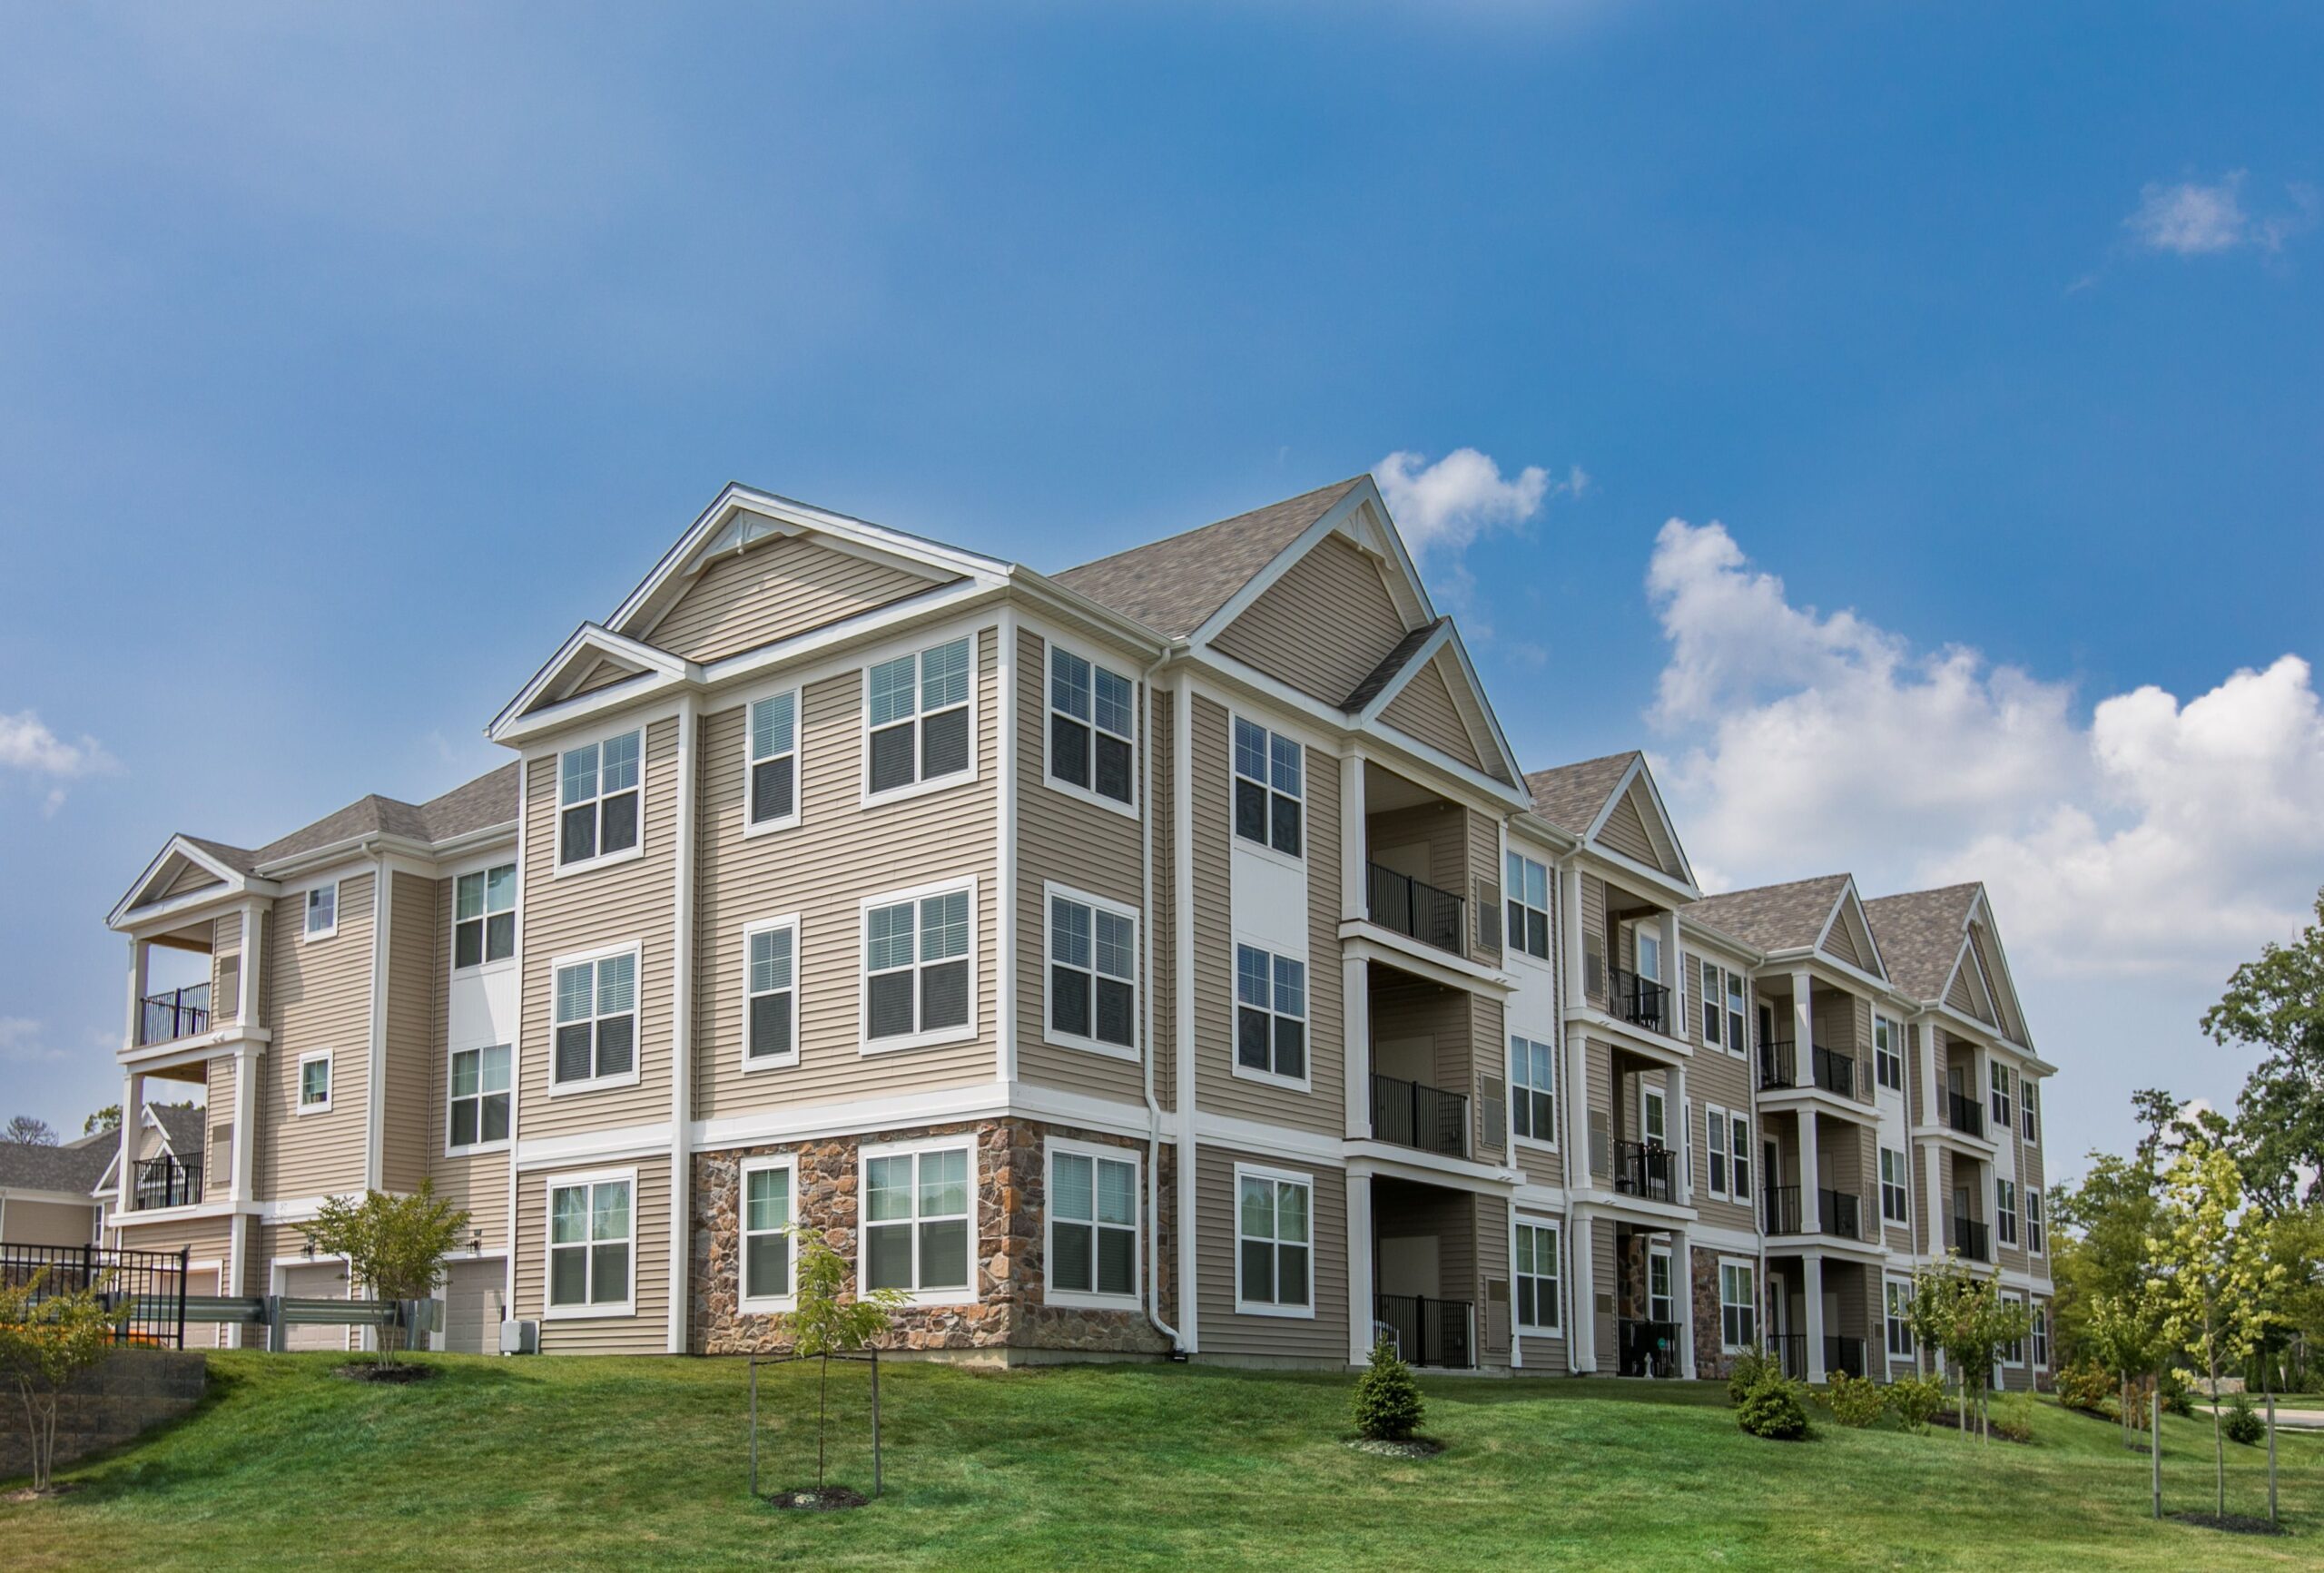 The Apartments at Charlestown Crossing, managed by Dolben, in Maryland